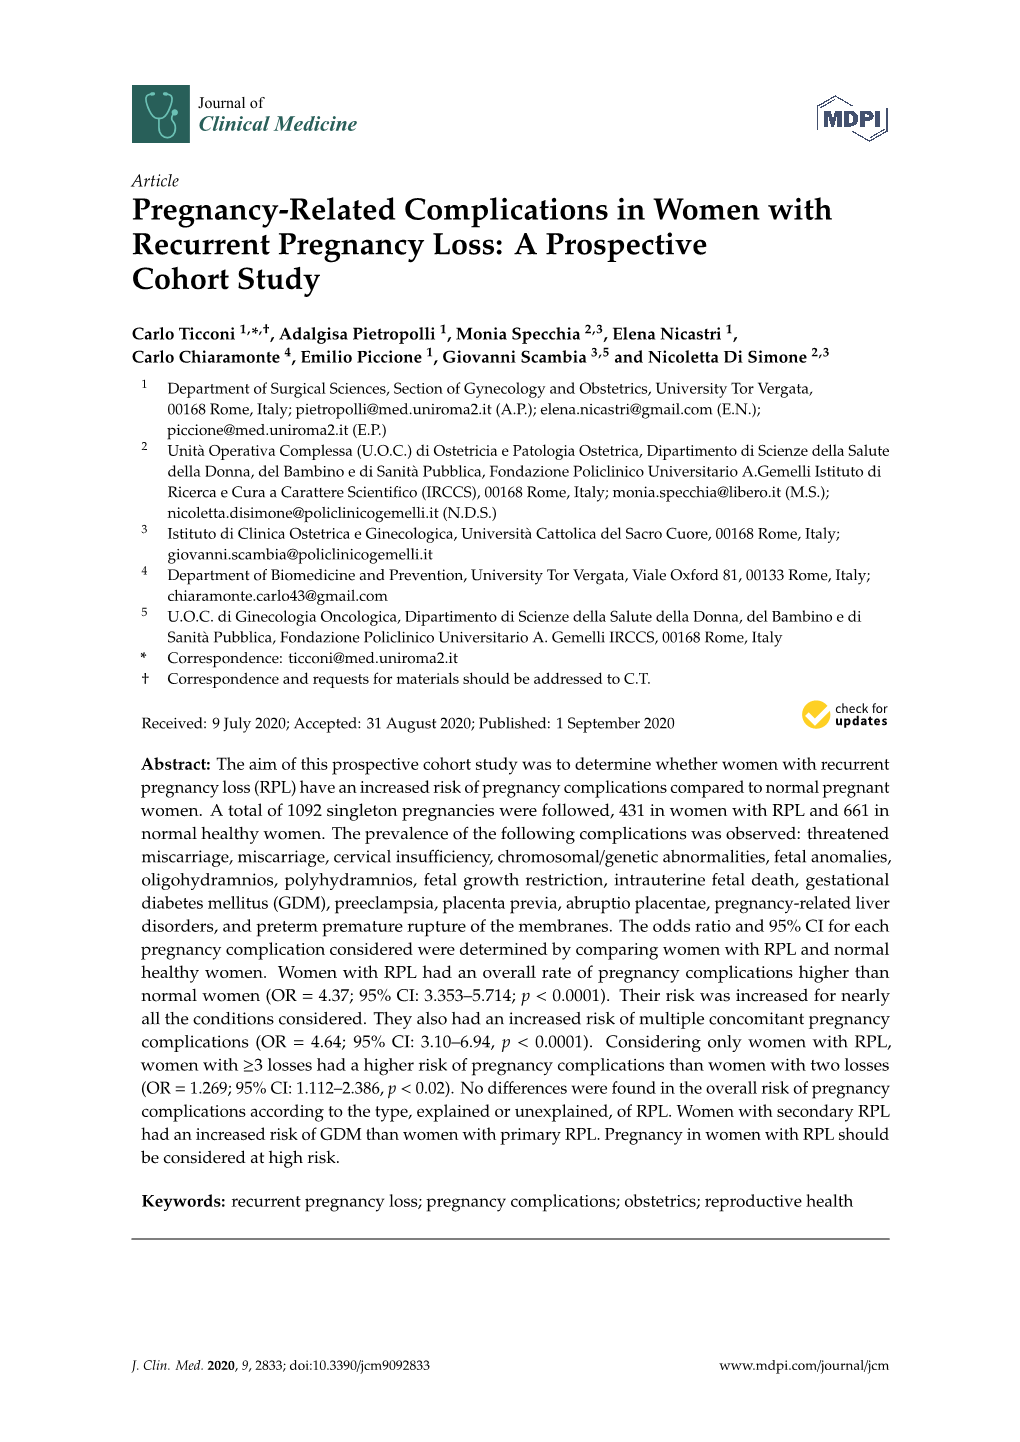 Pregnancy-Related Complications in Women with Recurrent Pregnancy Loss: a Prospective Cohort Study